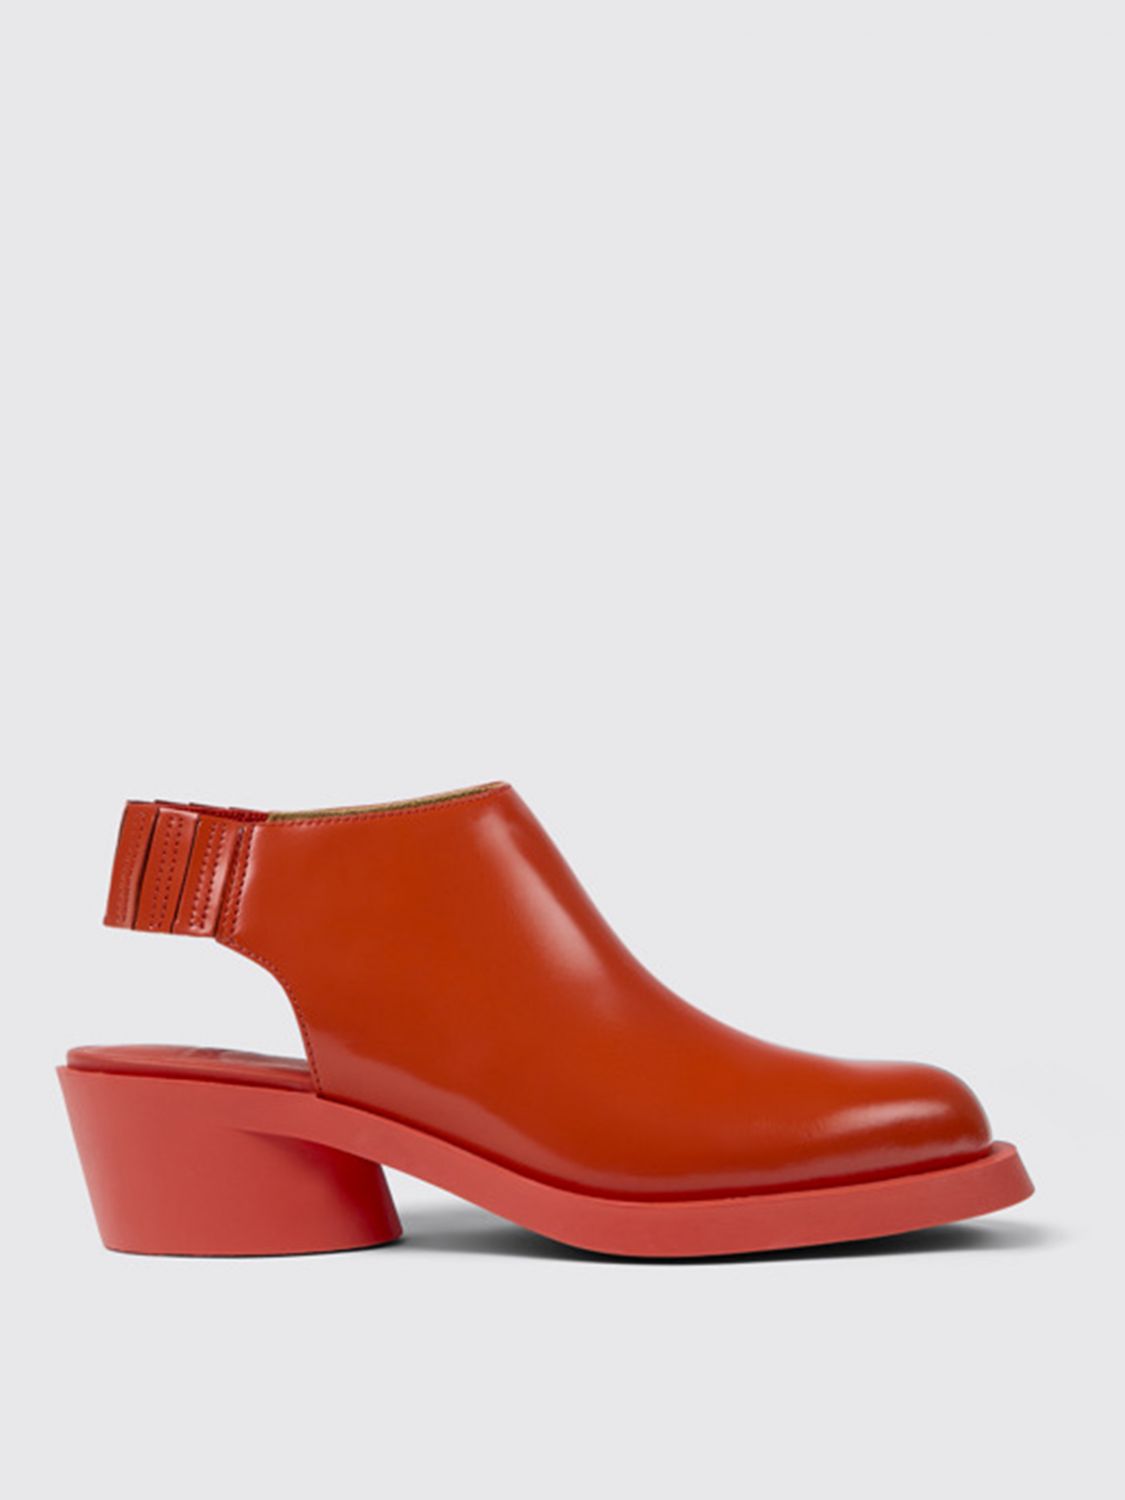 Camper High Heel Shoes  Woman In Red